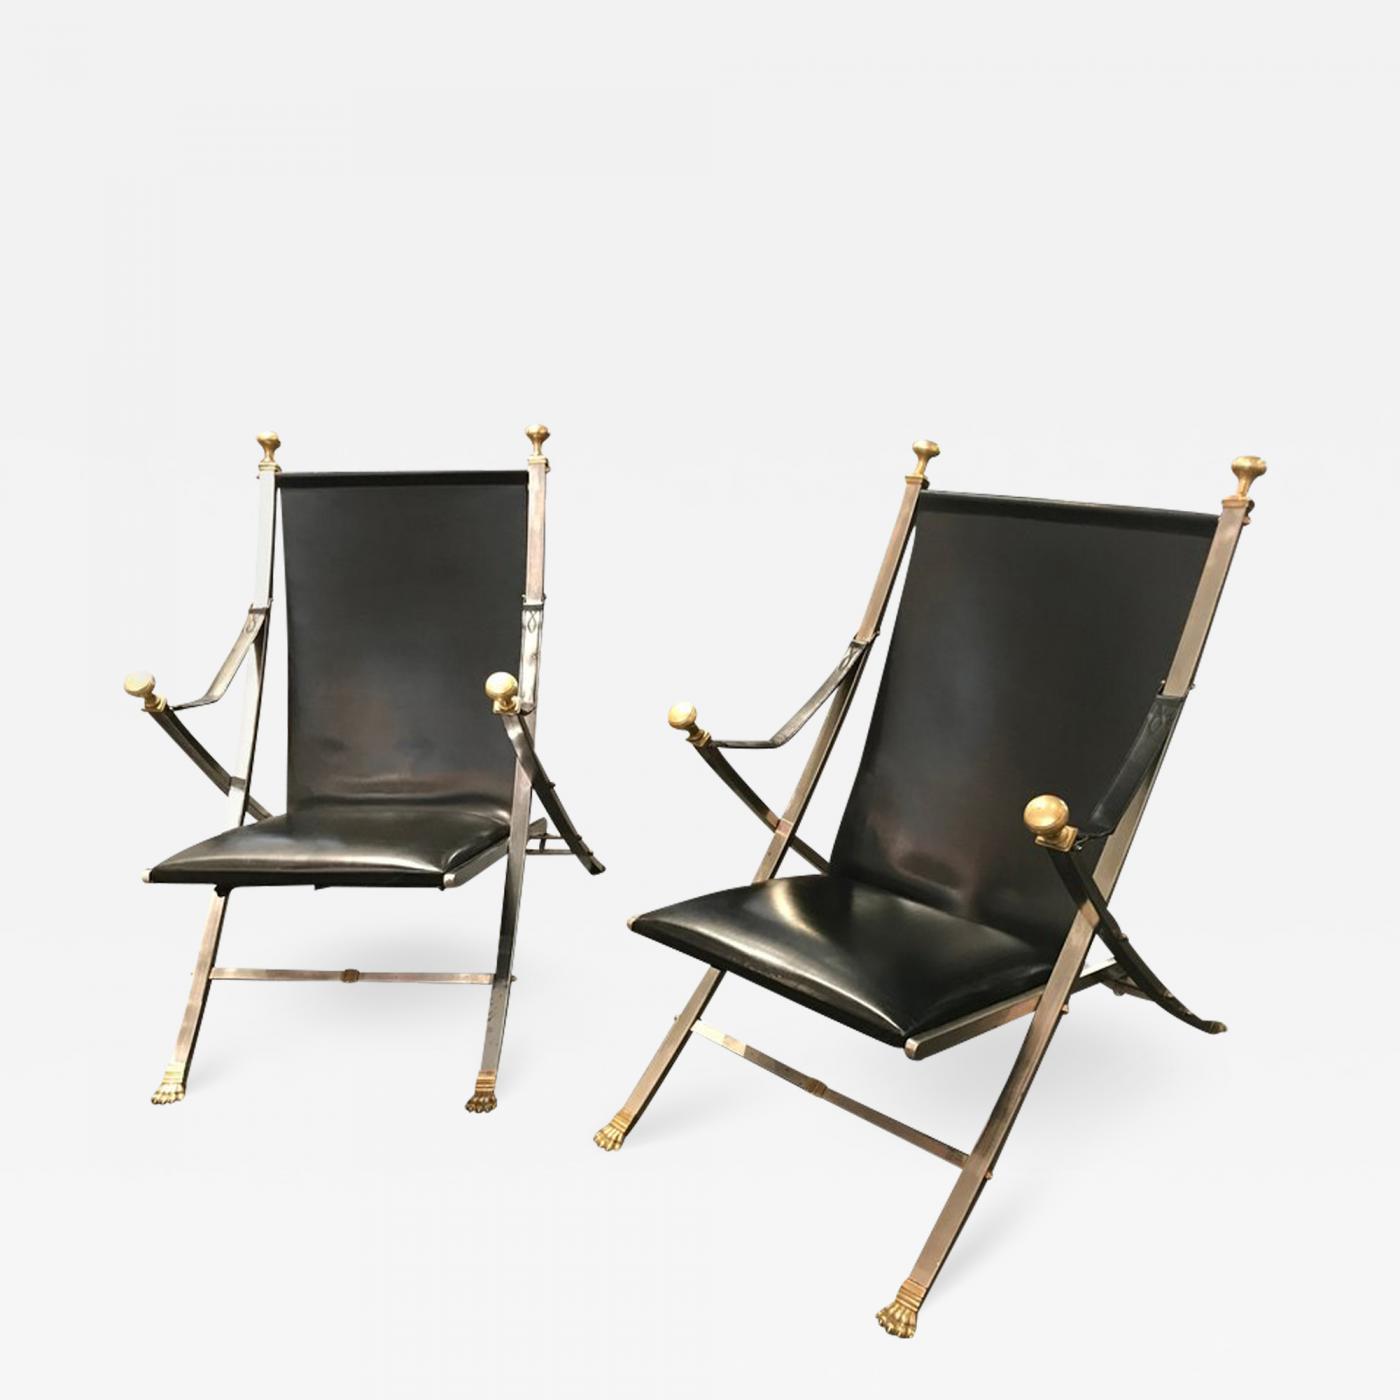 Pair of polished steel and leather folding chairs in the style of Maison Jansen